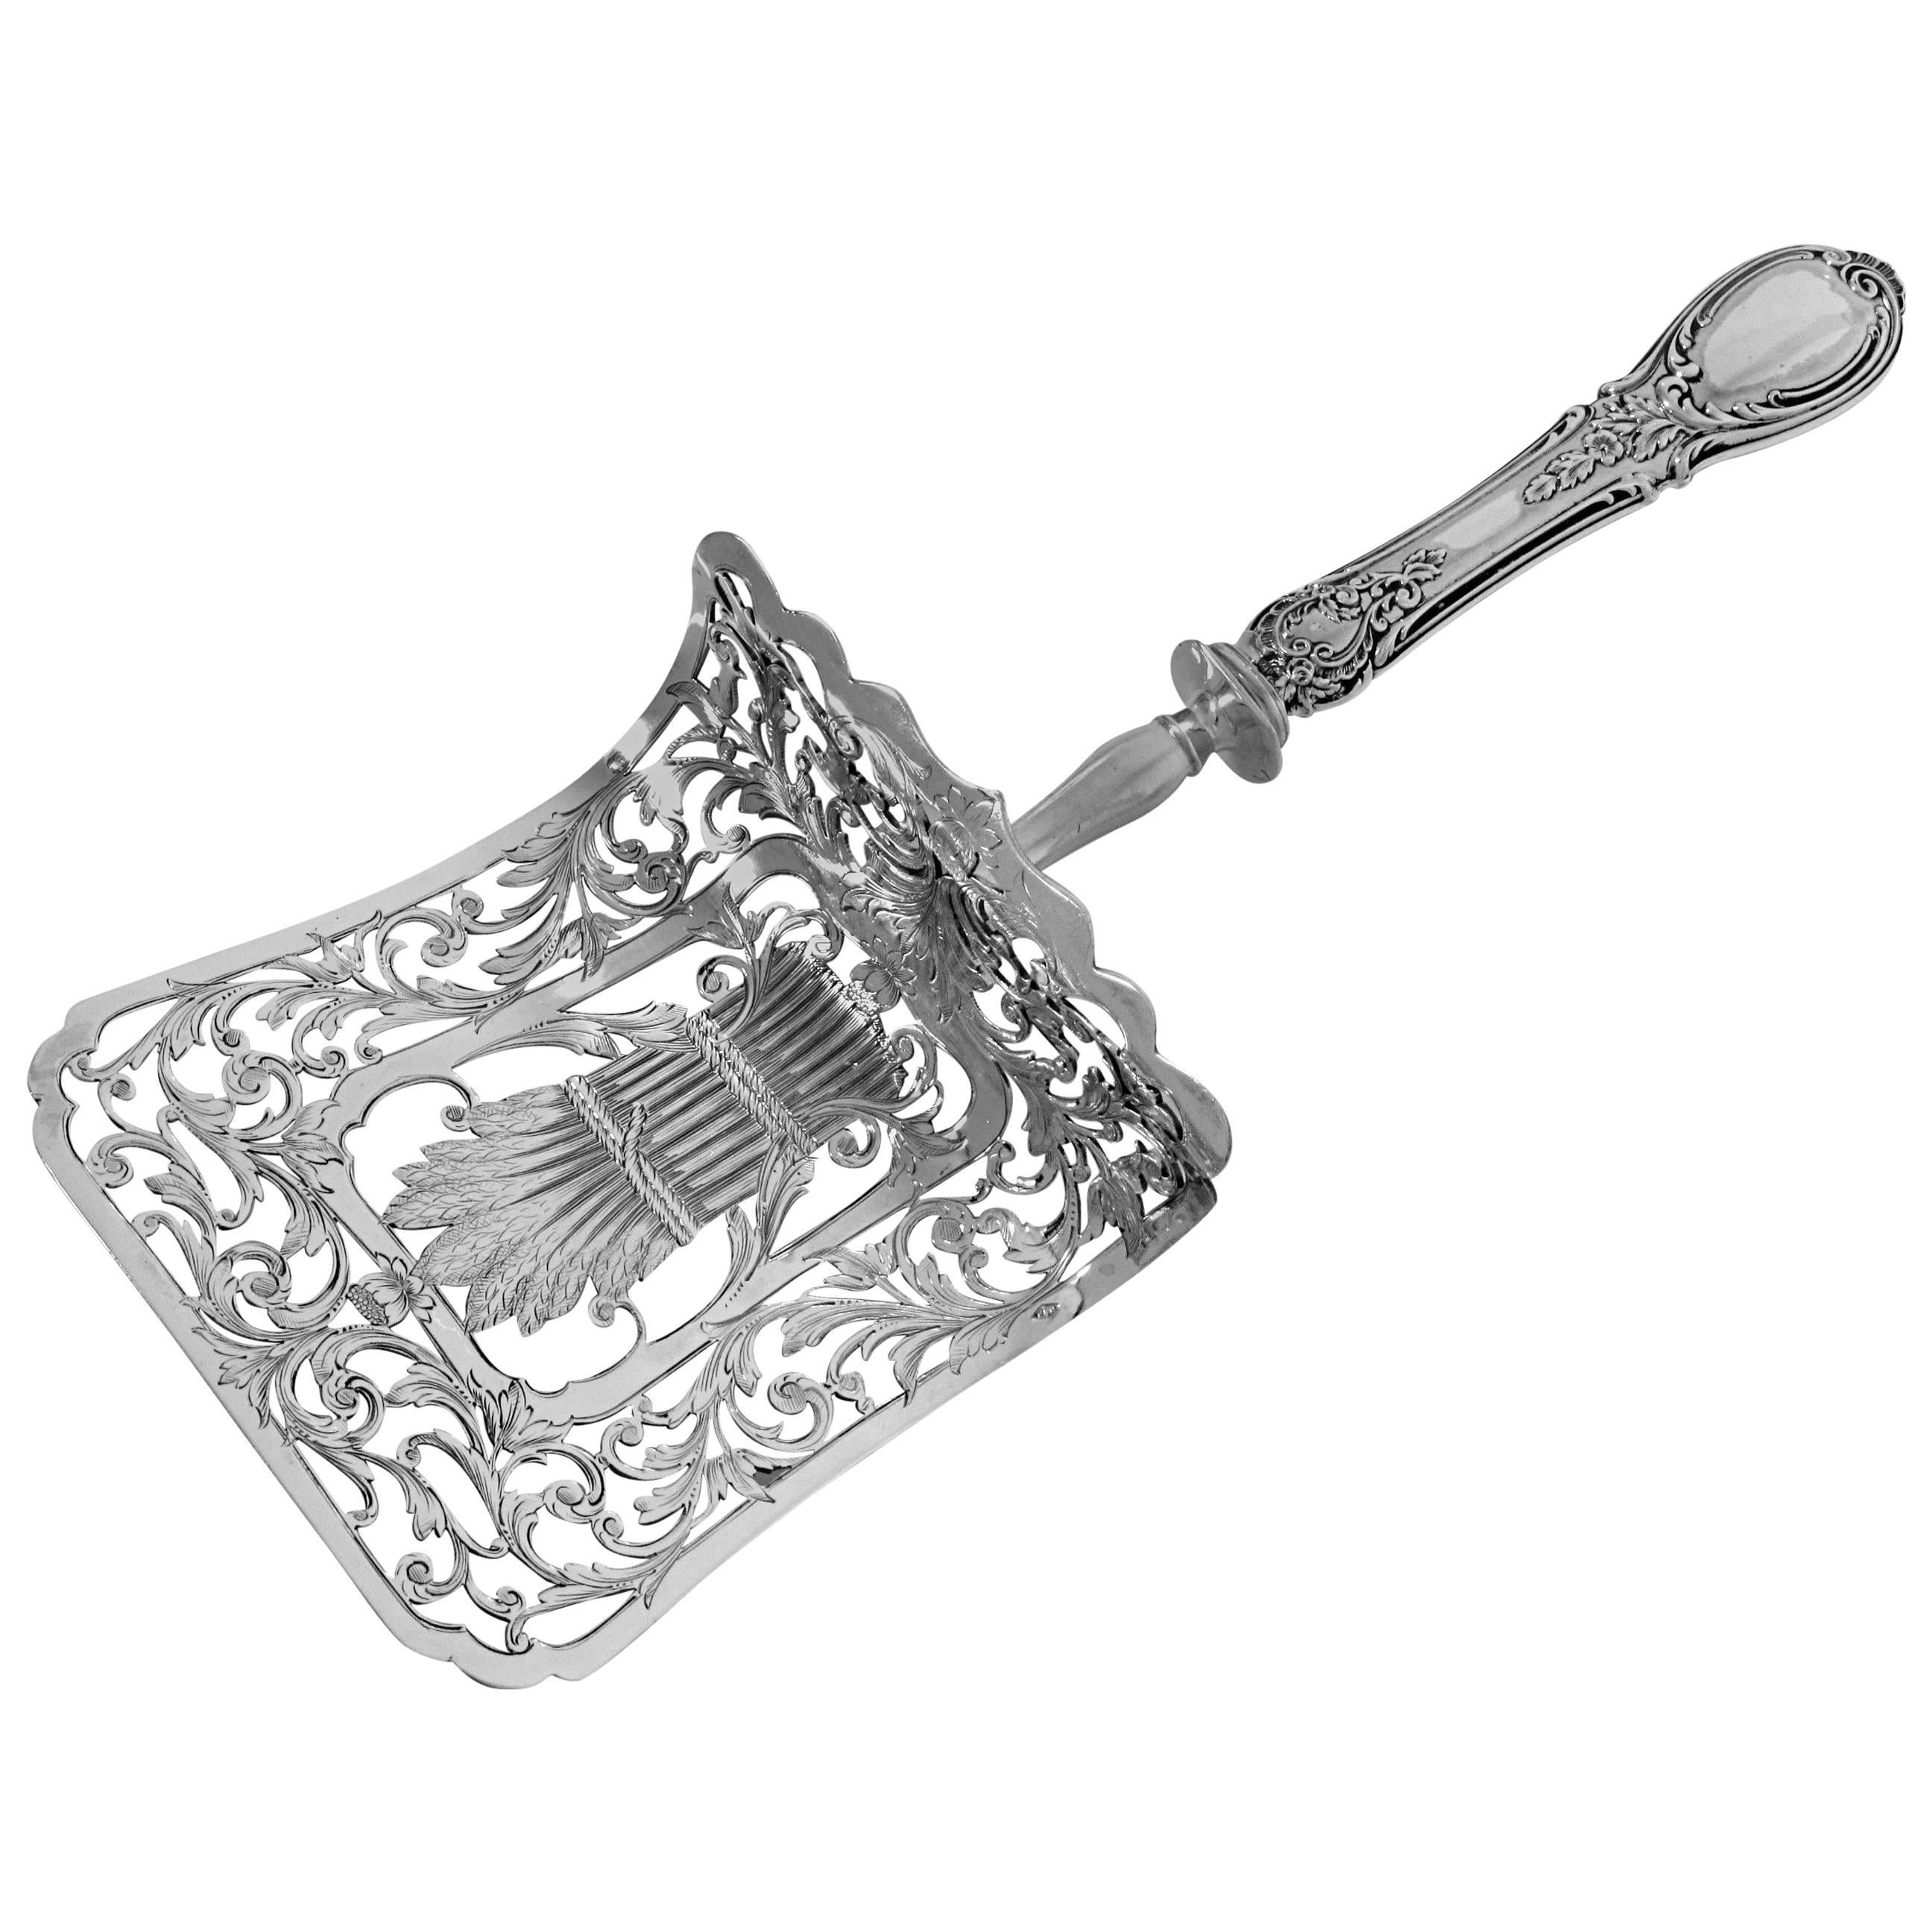 Puiforcat Fabulous French All Sterling Silver Asparagus/Pastry/Toast Server Rose For Sale